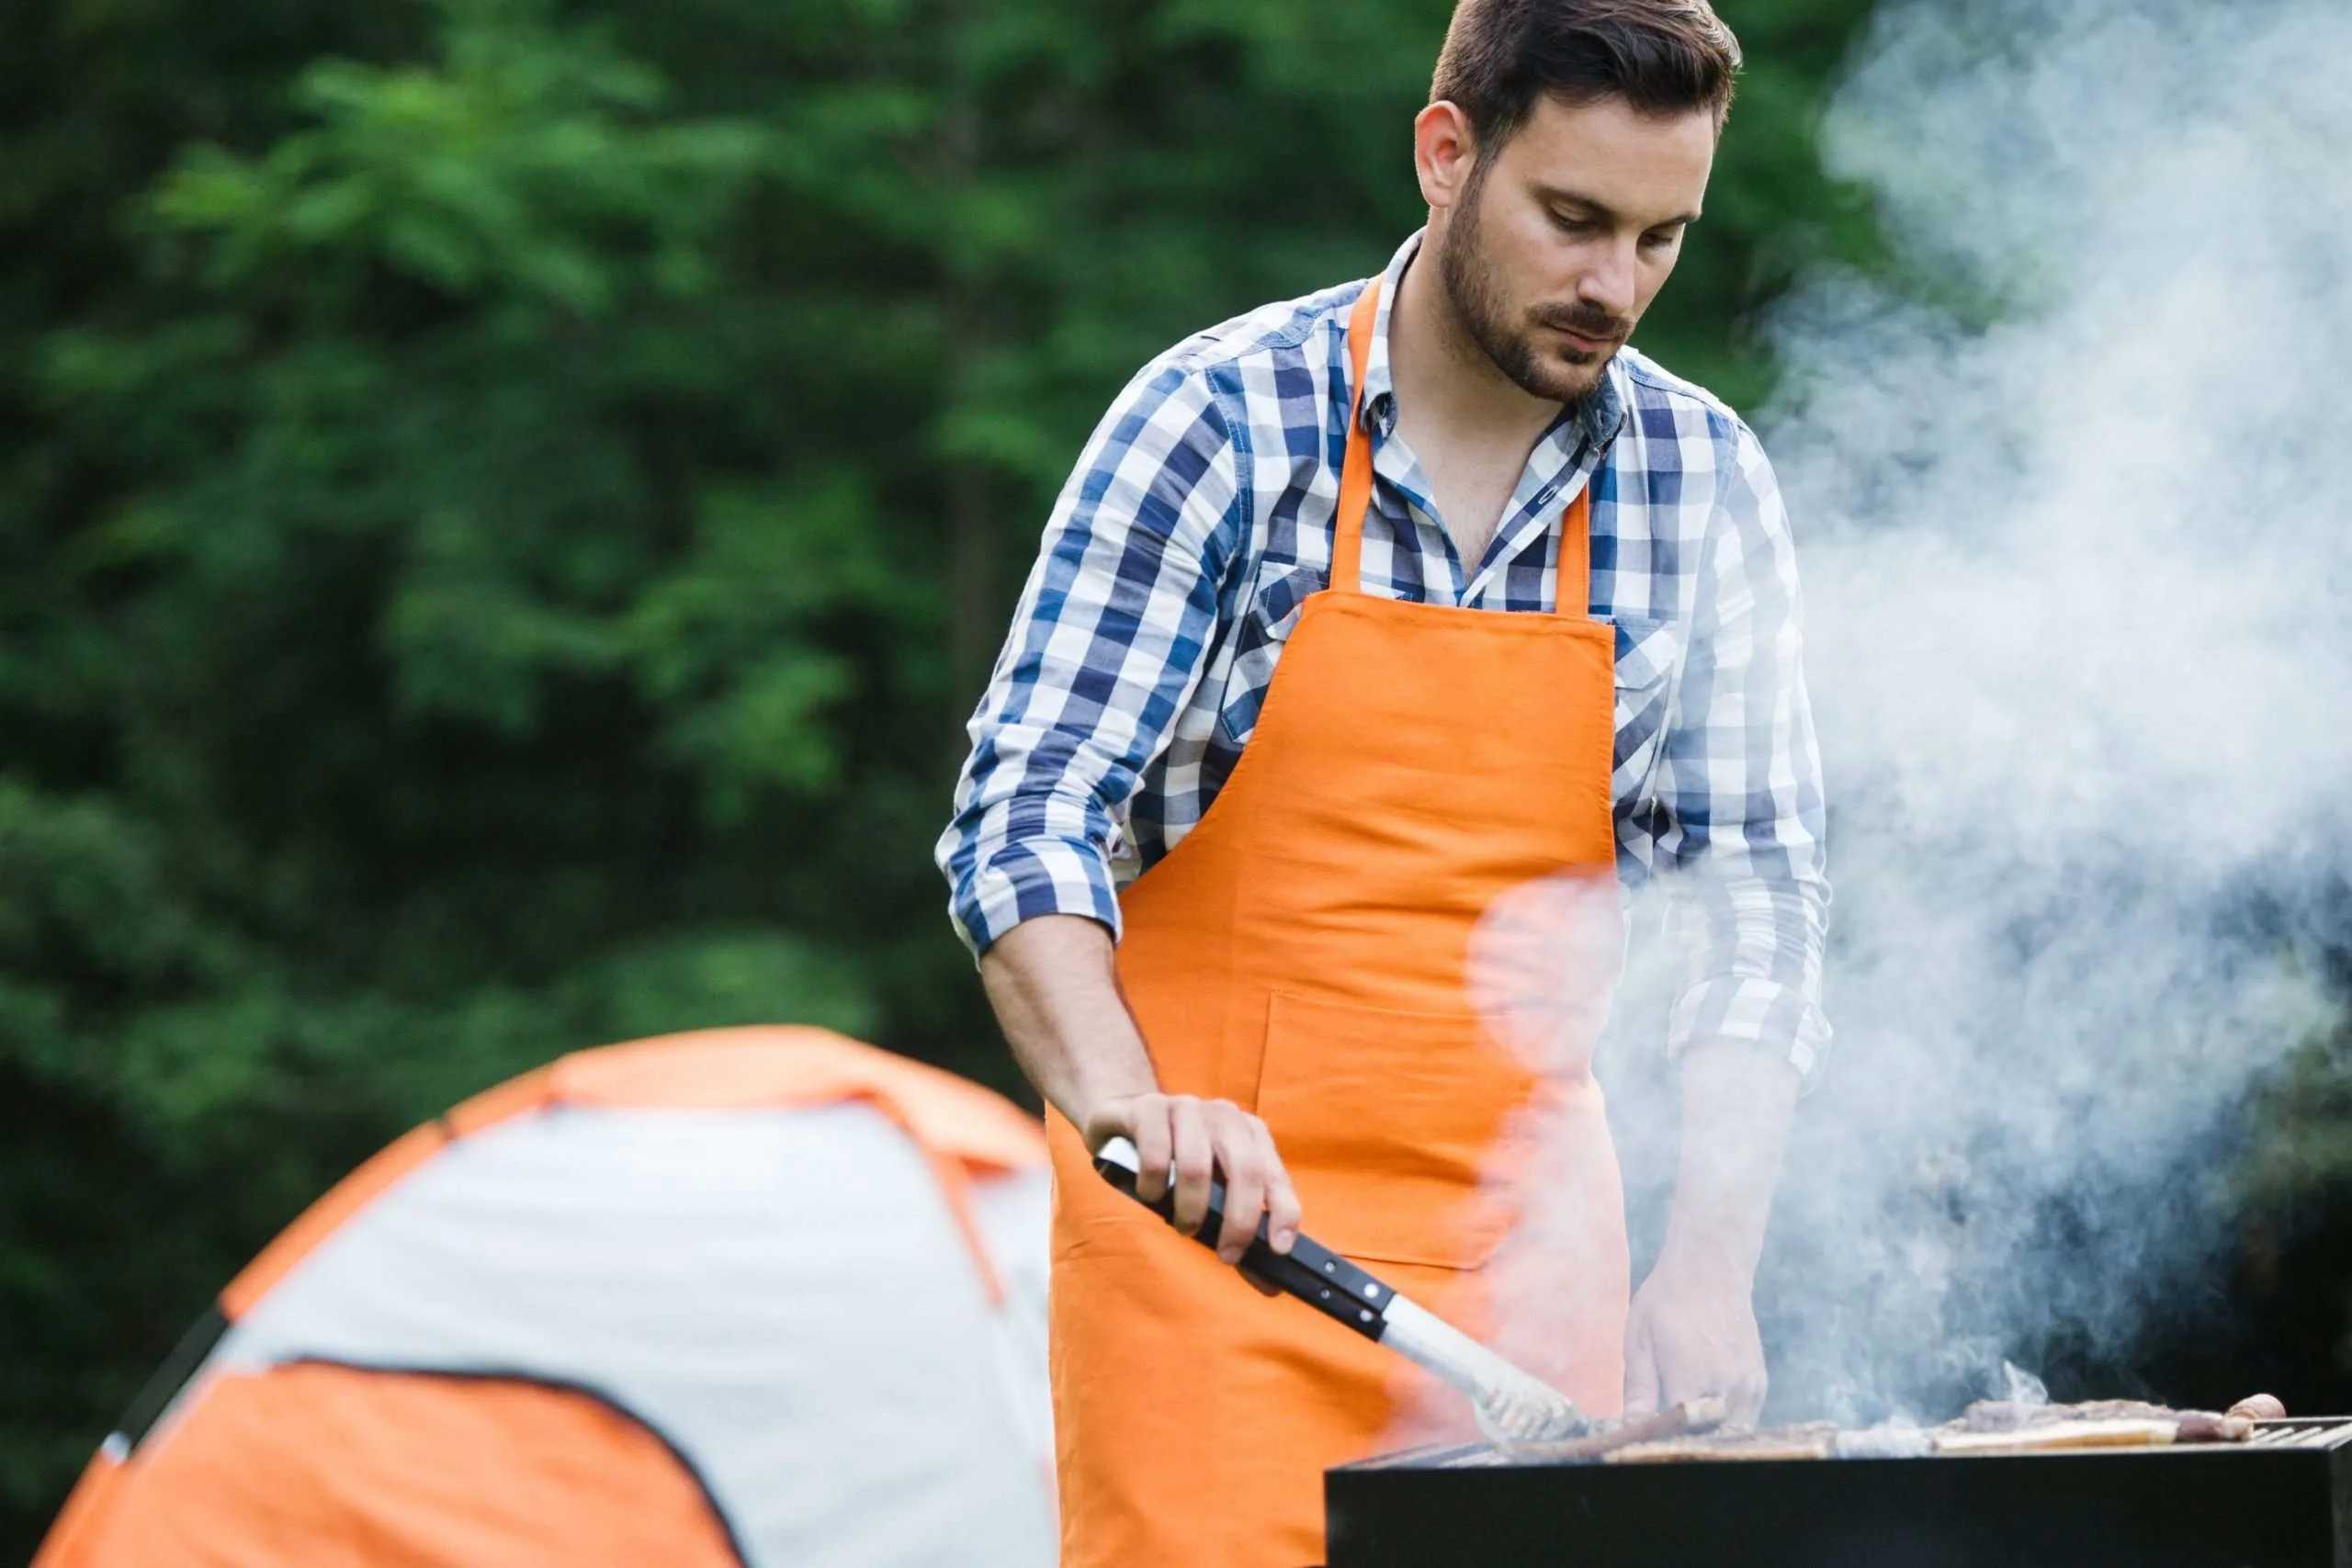 Man grilling in front of tent